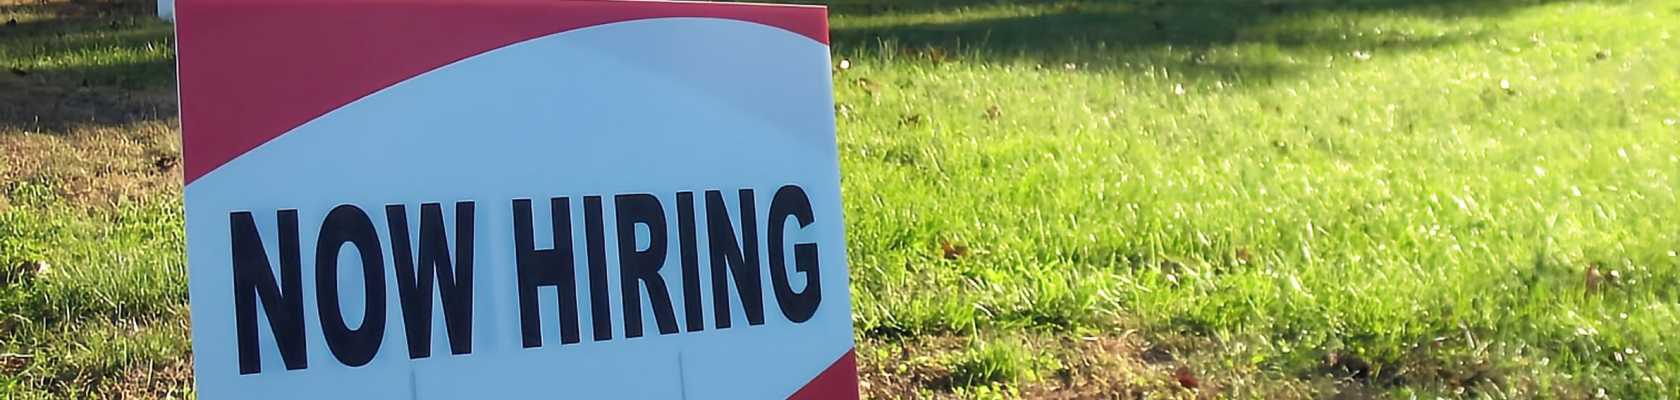 now hiring seasonal employees sign in grass.